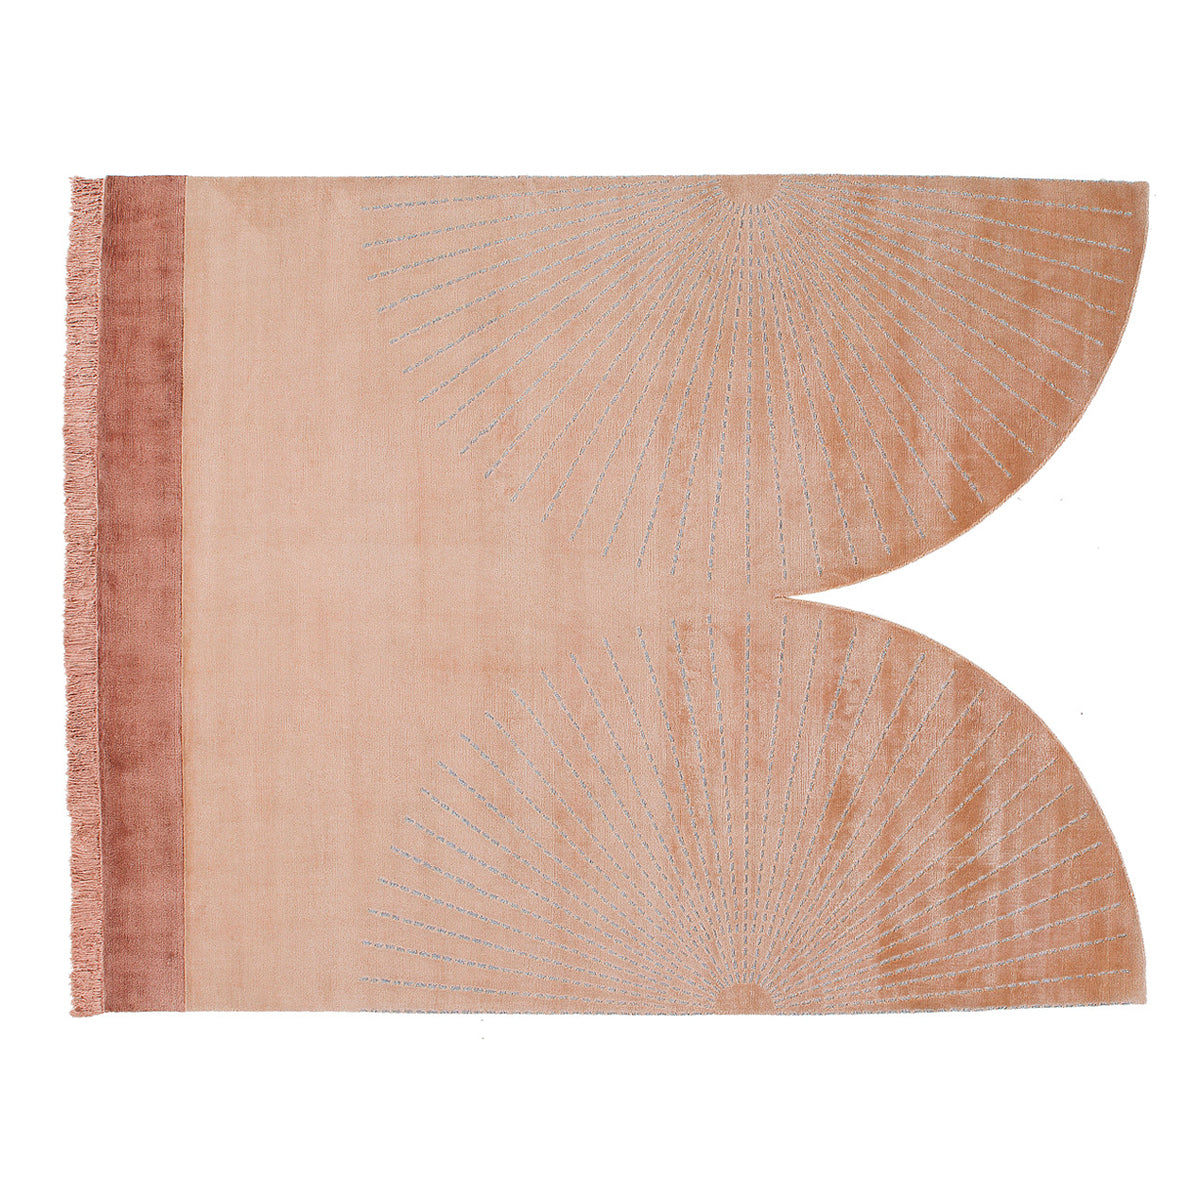 Irradia Rug - Divided by Golran | Do Shop